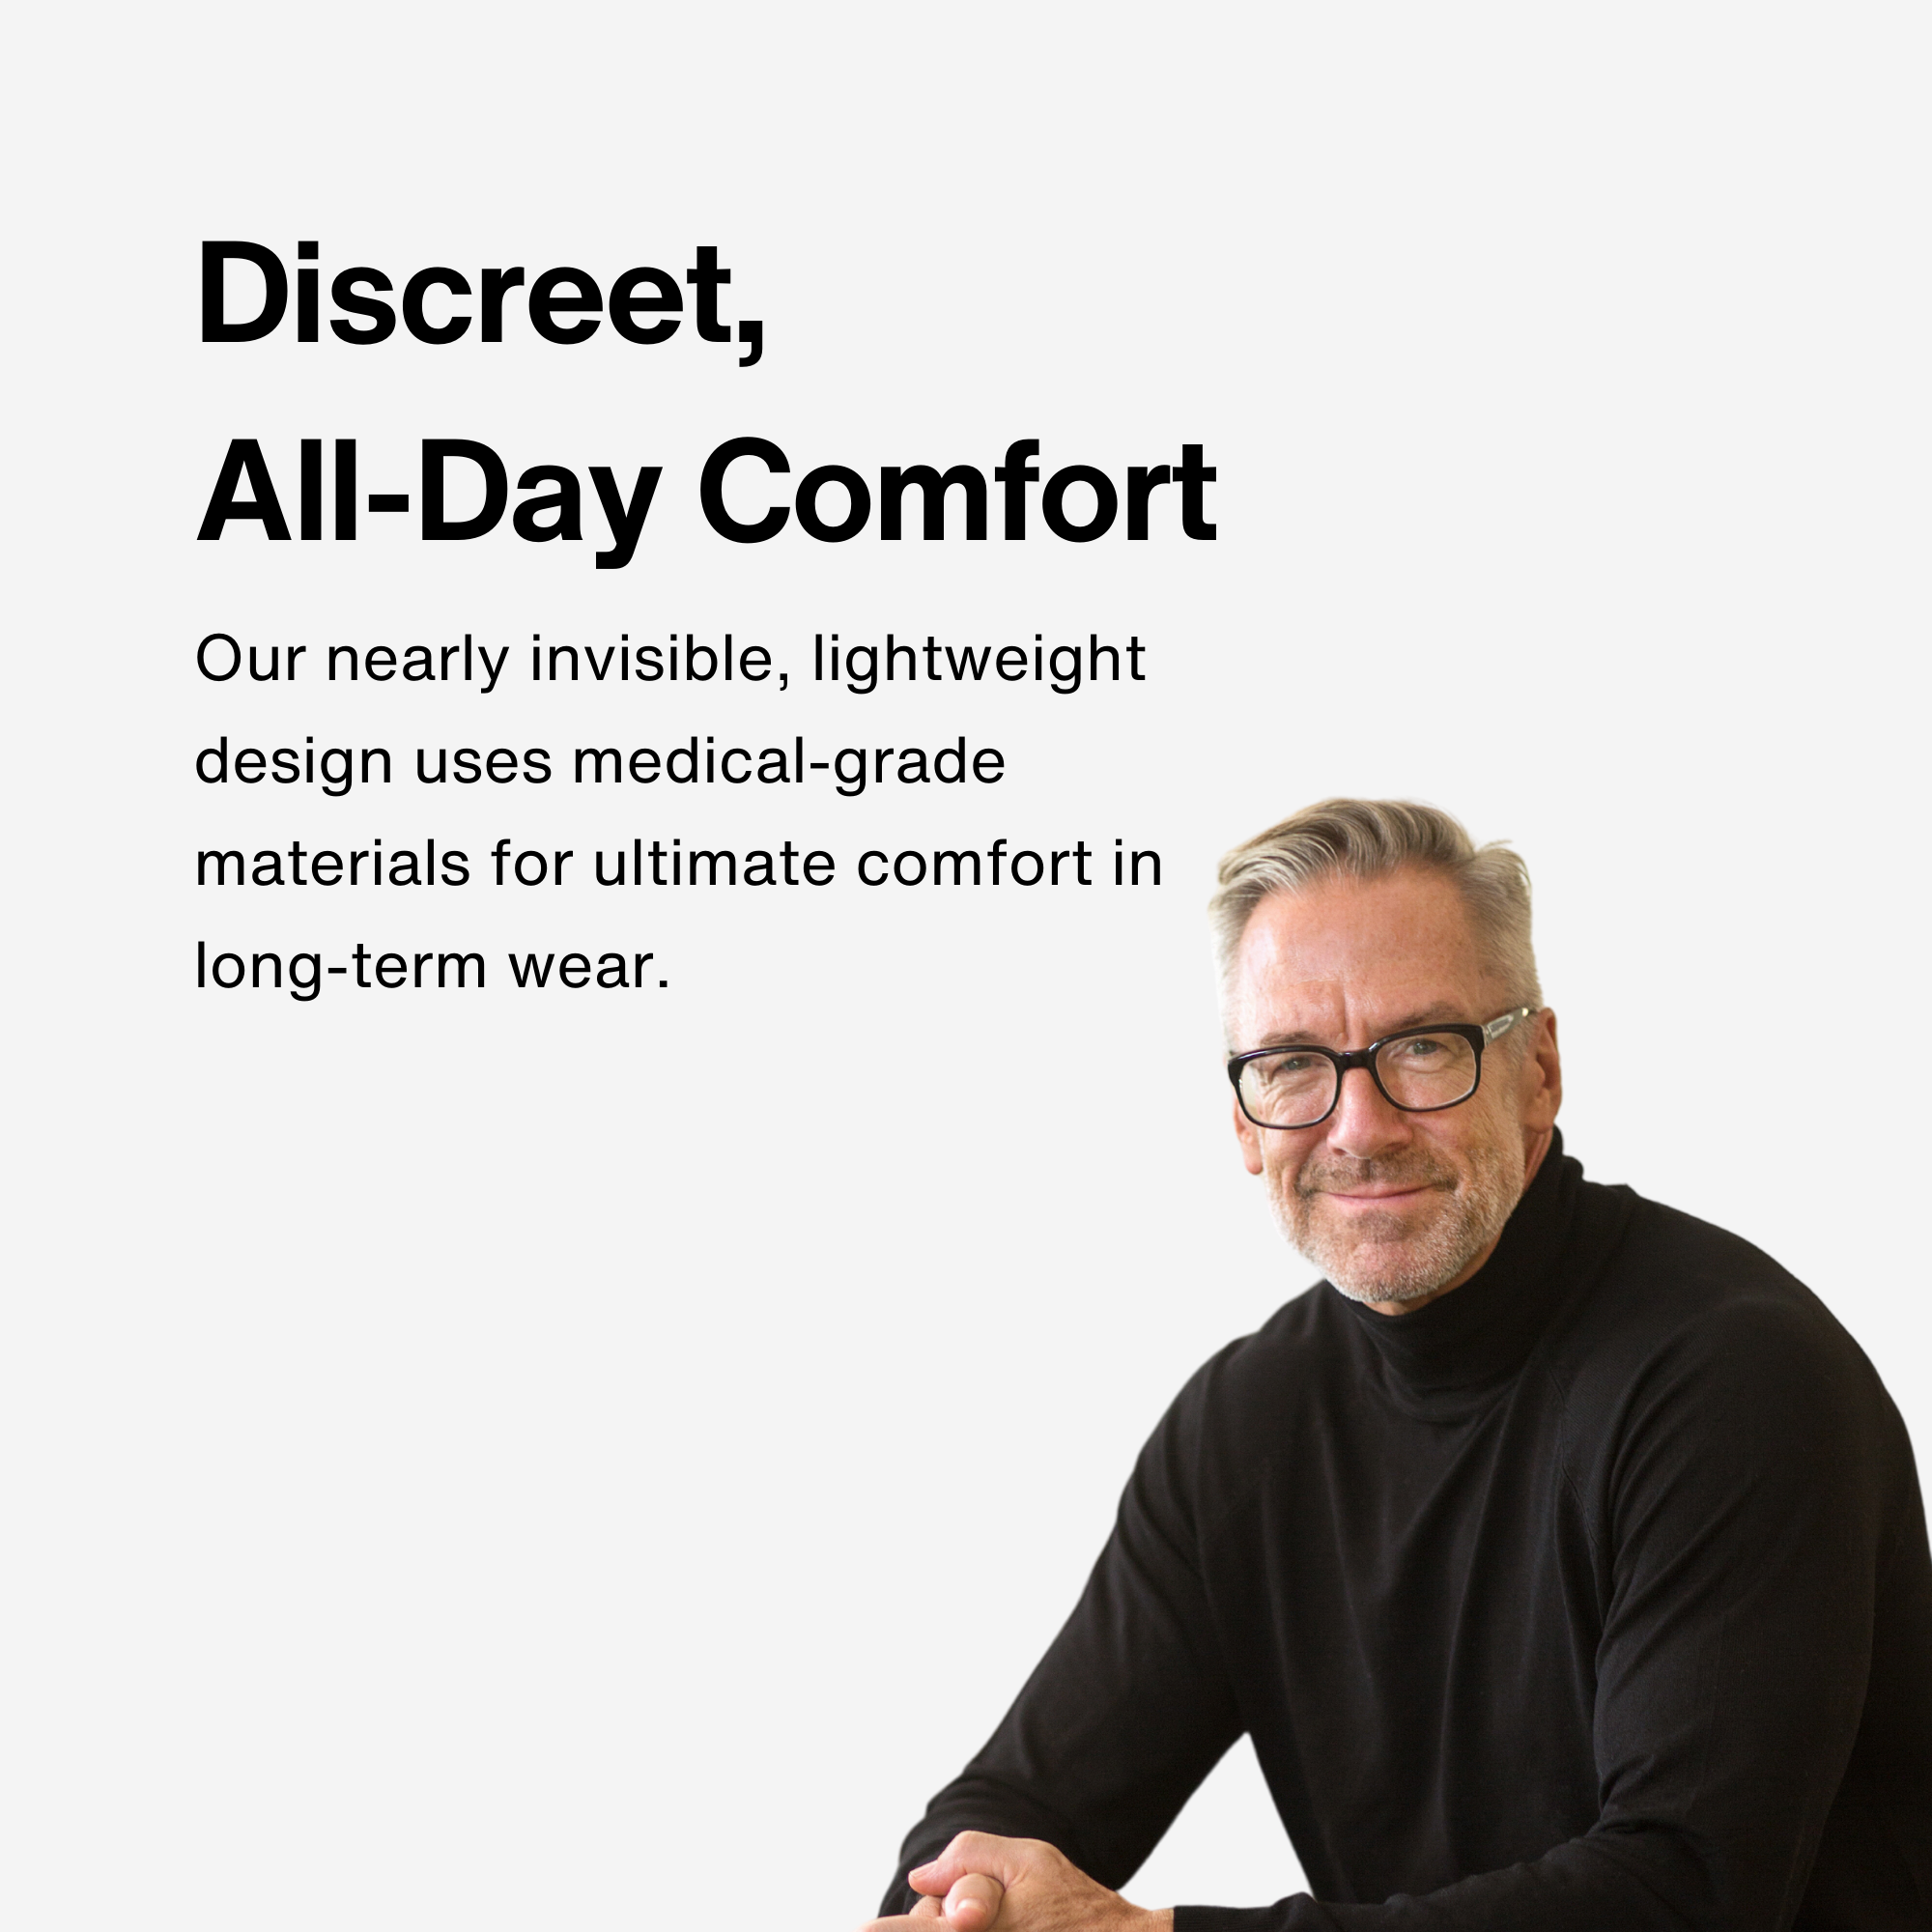 Discreet,  All-Day Comfort Our nearly invisible, lightweight design uses medical-grade materials for ultimate comfort in long-term wear.